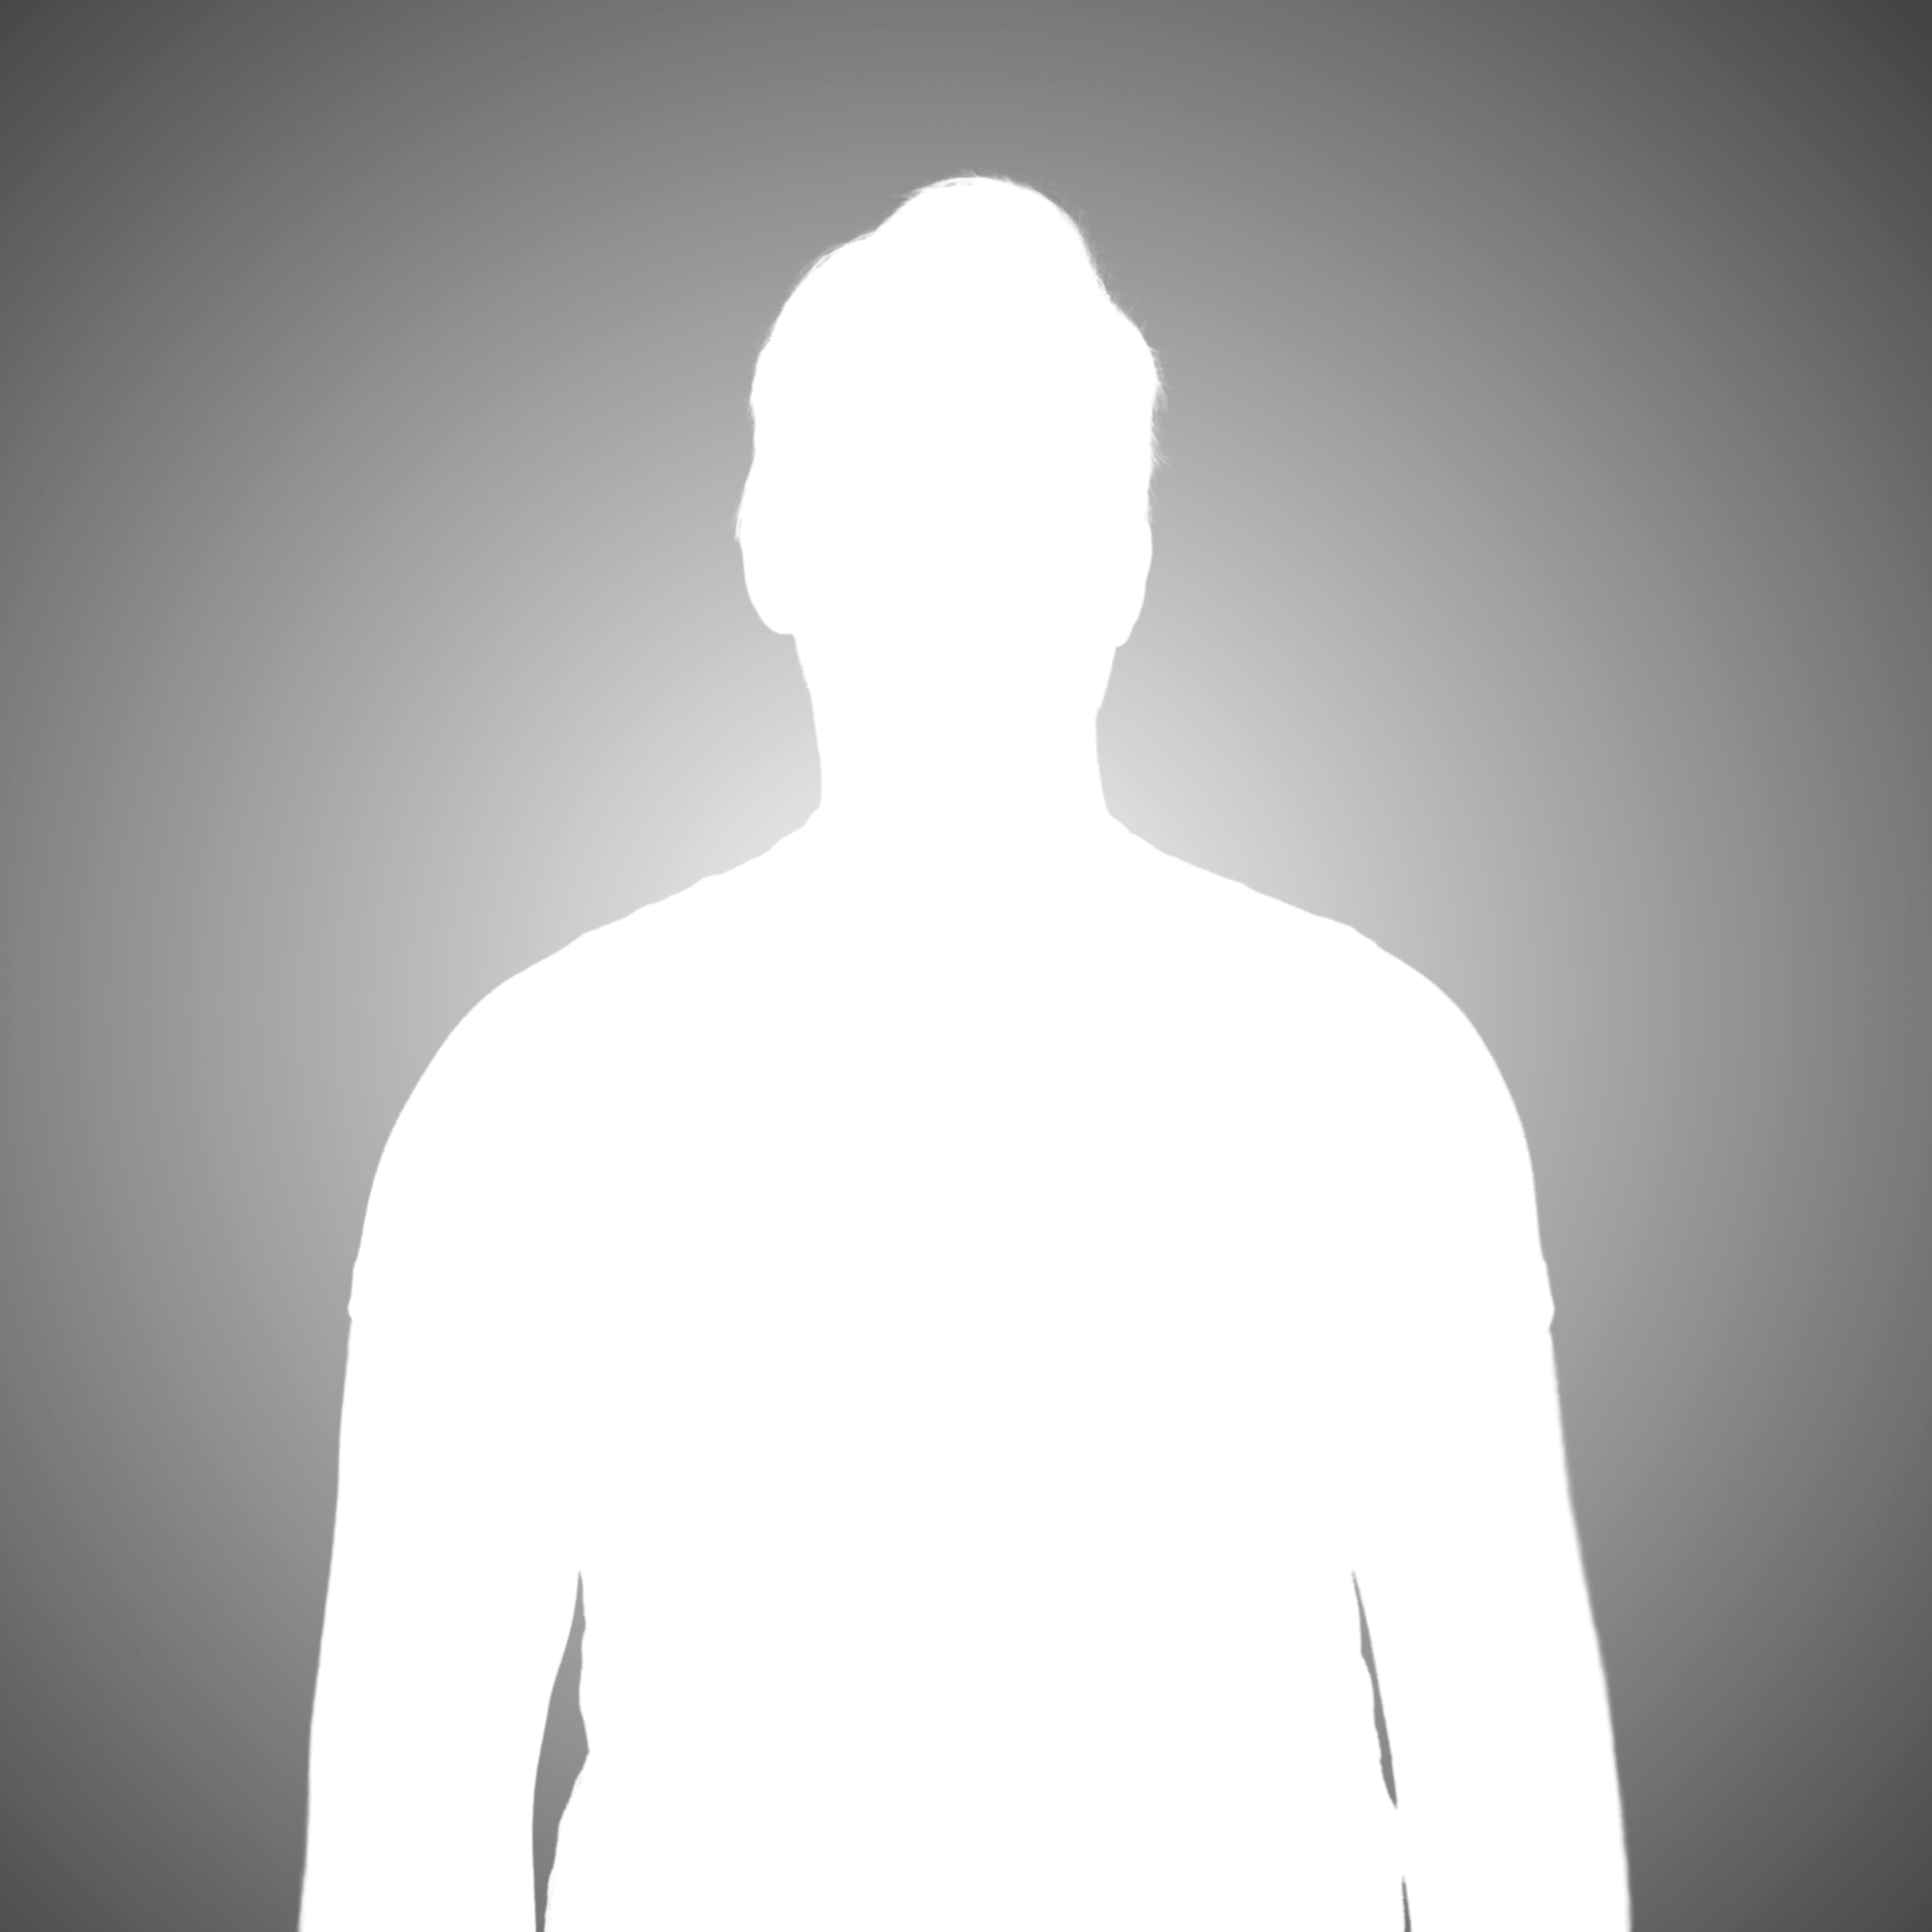 Outline of Man on Grey Background